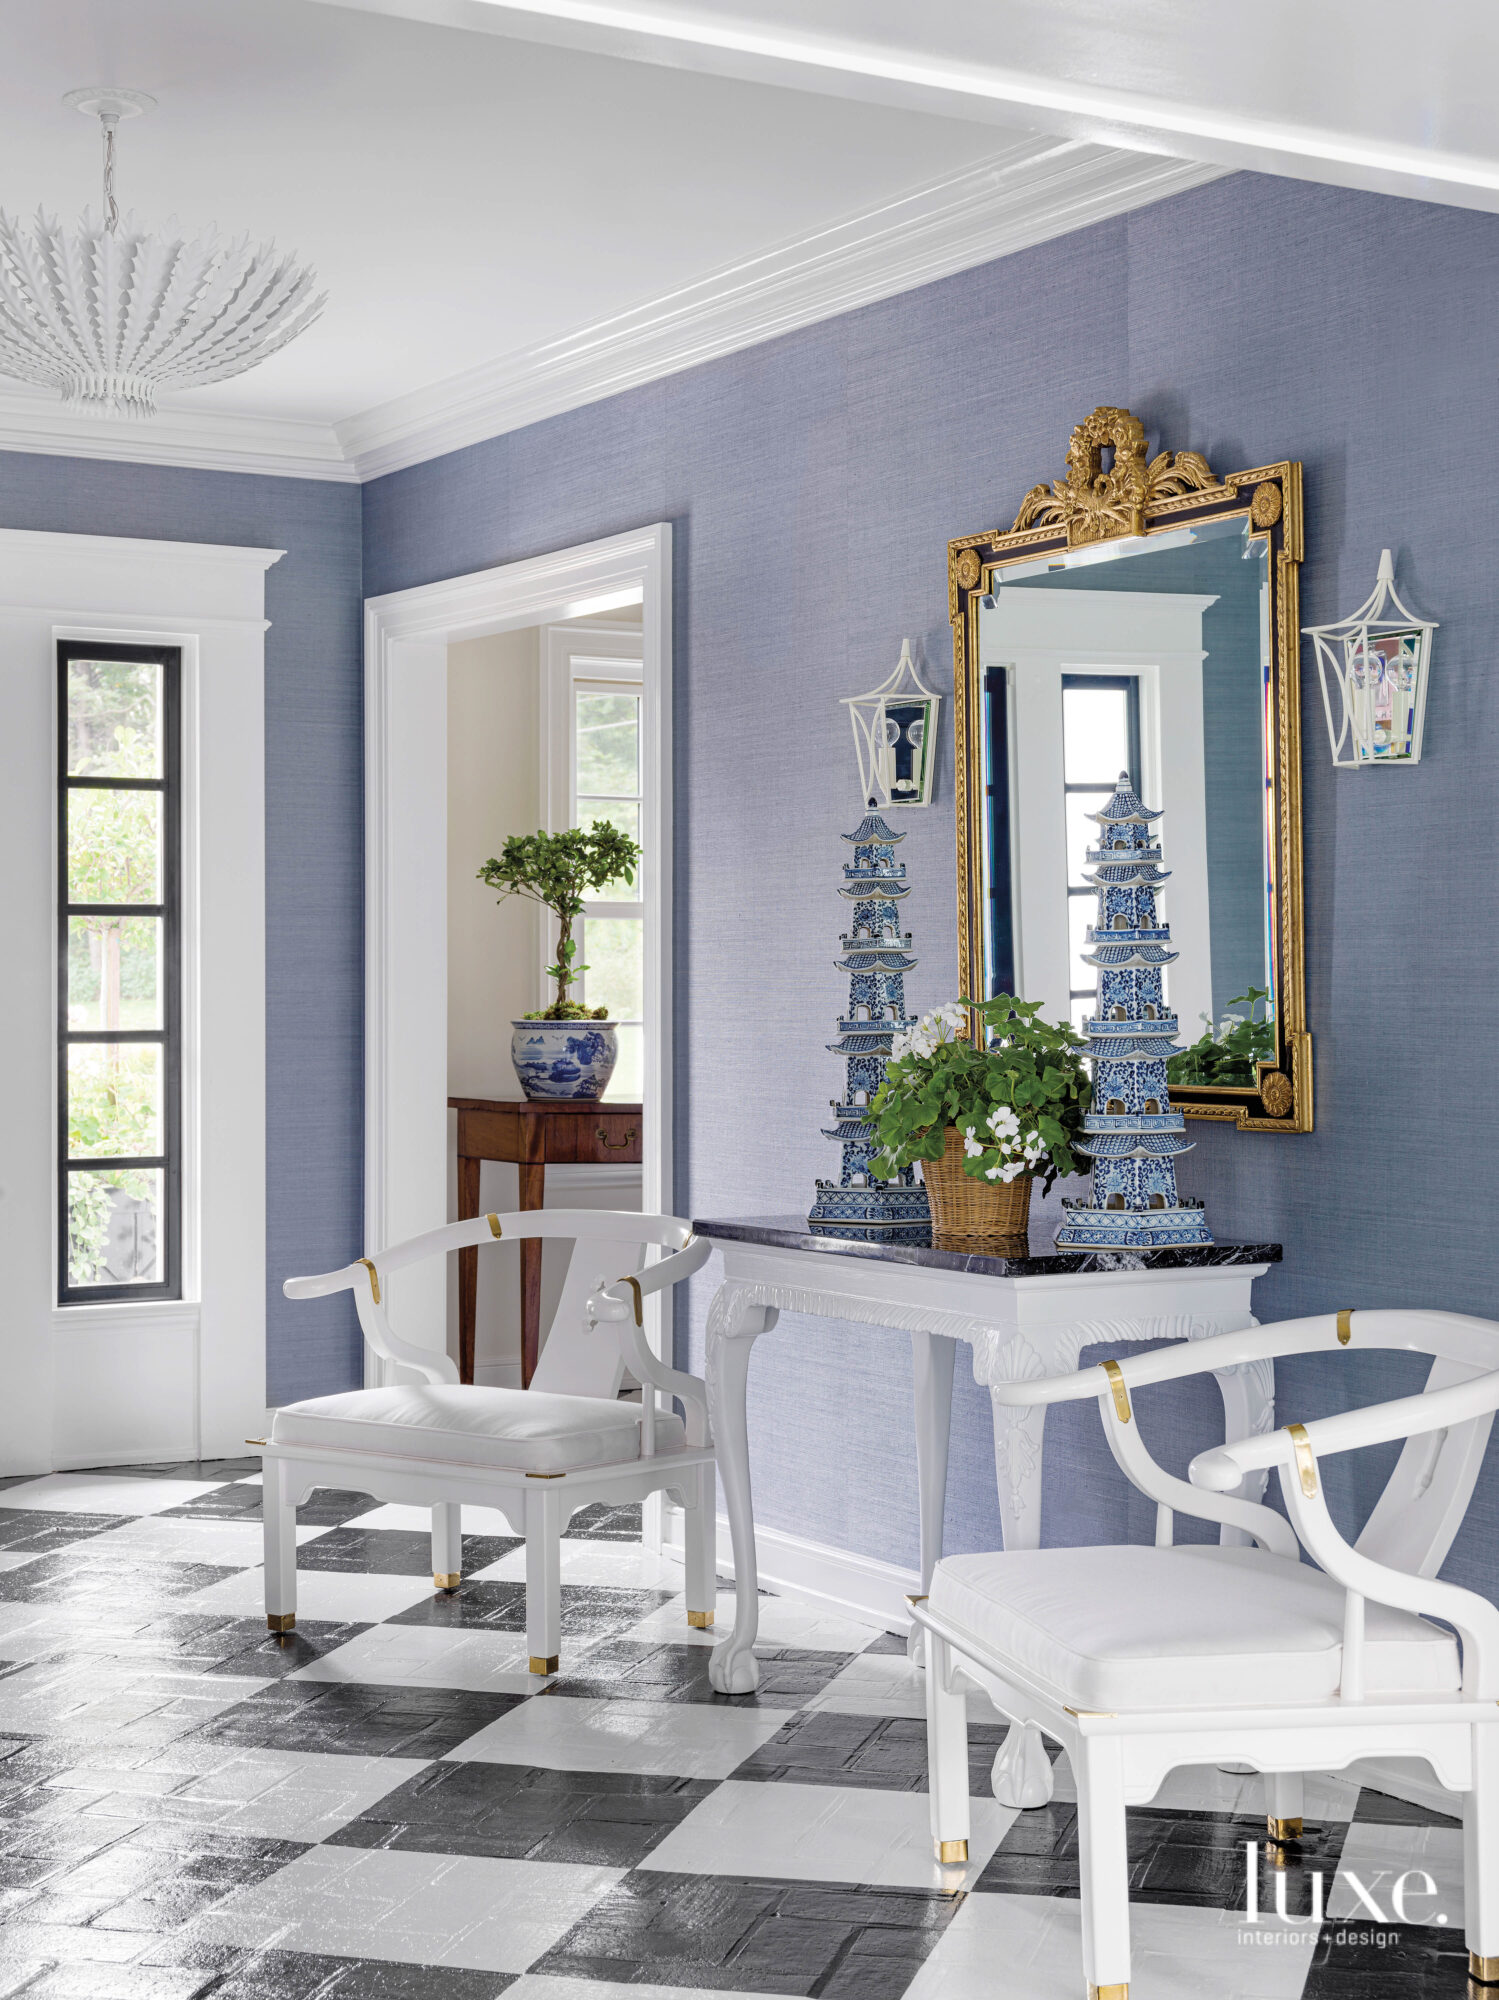 The foyer has blue walls, black-and-white checkered floors and vintage furniture.